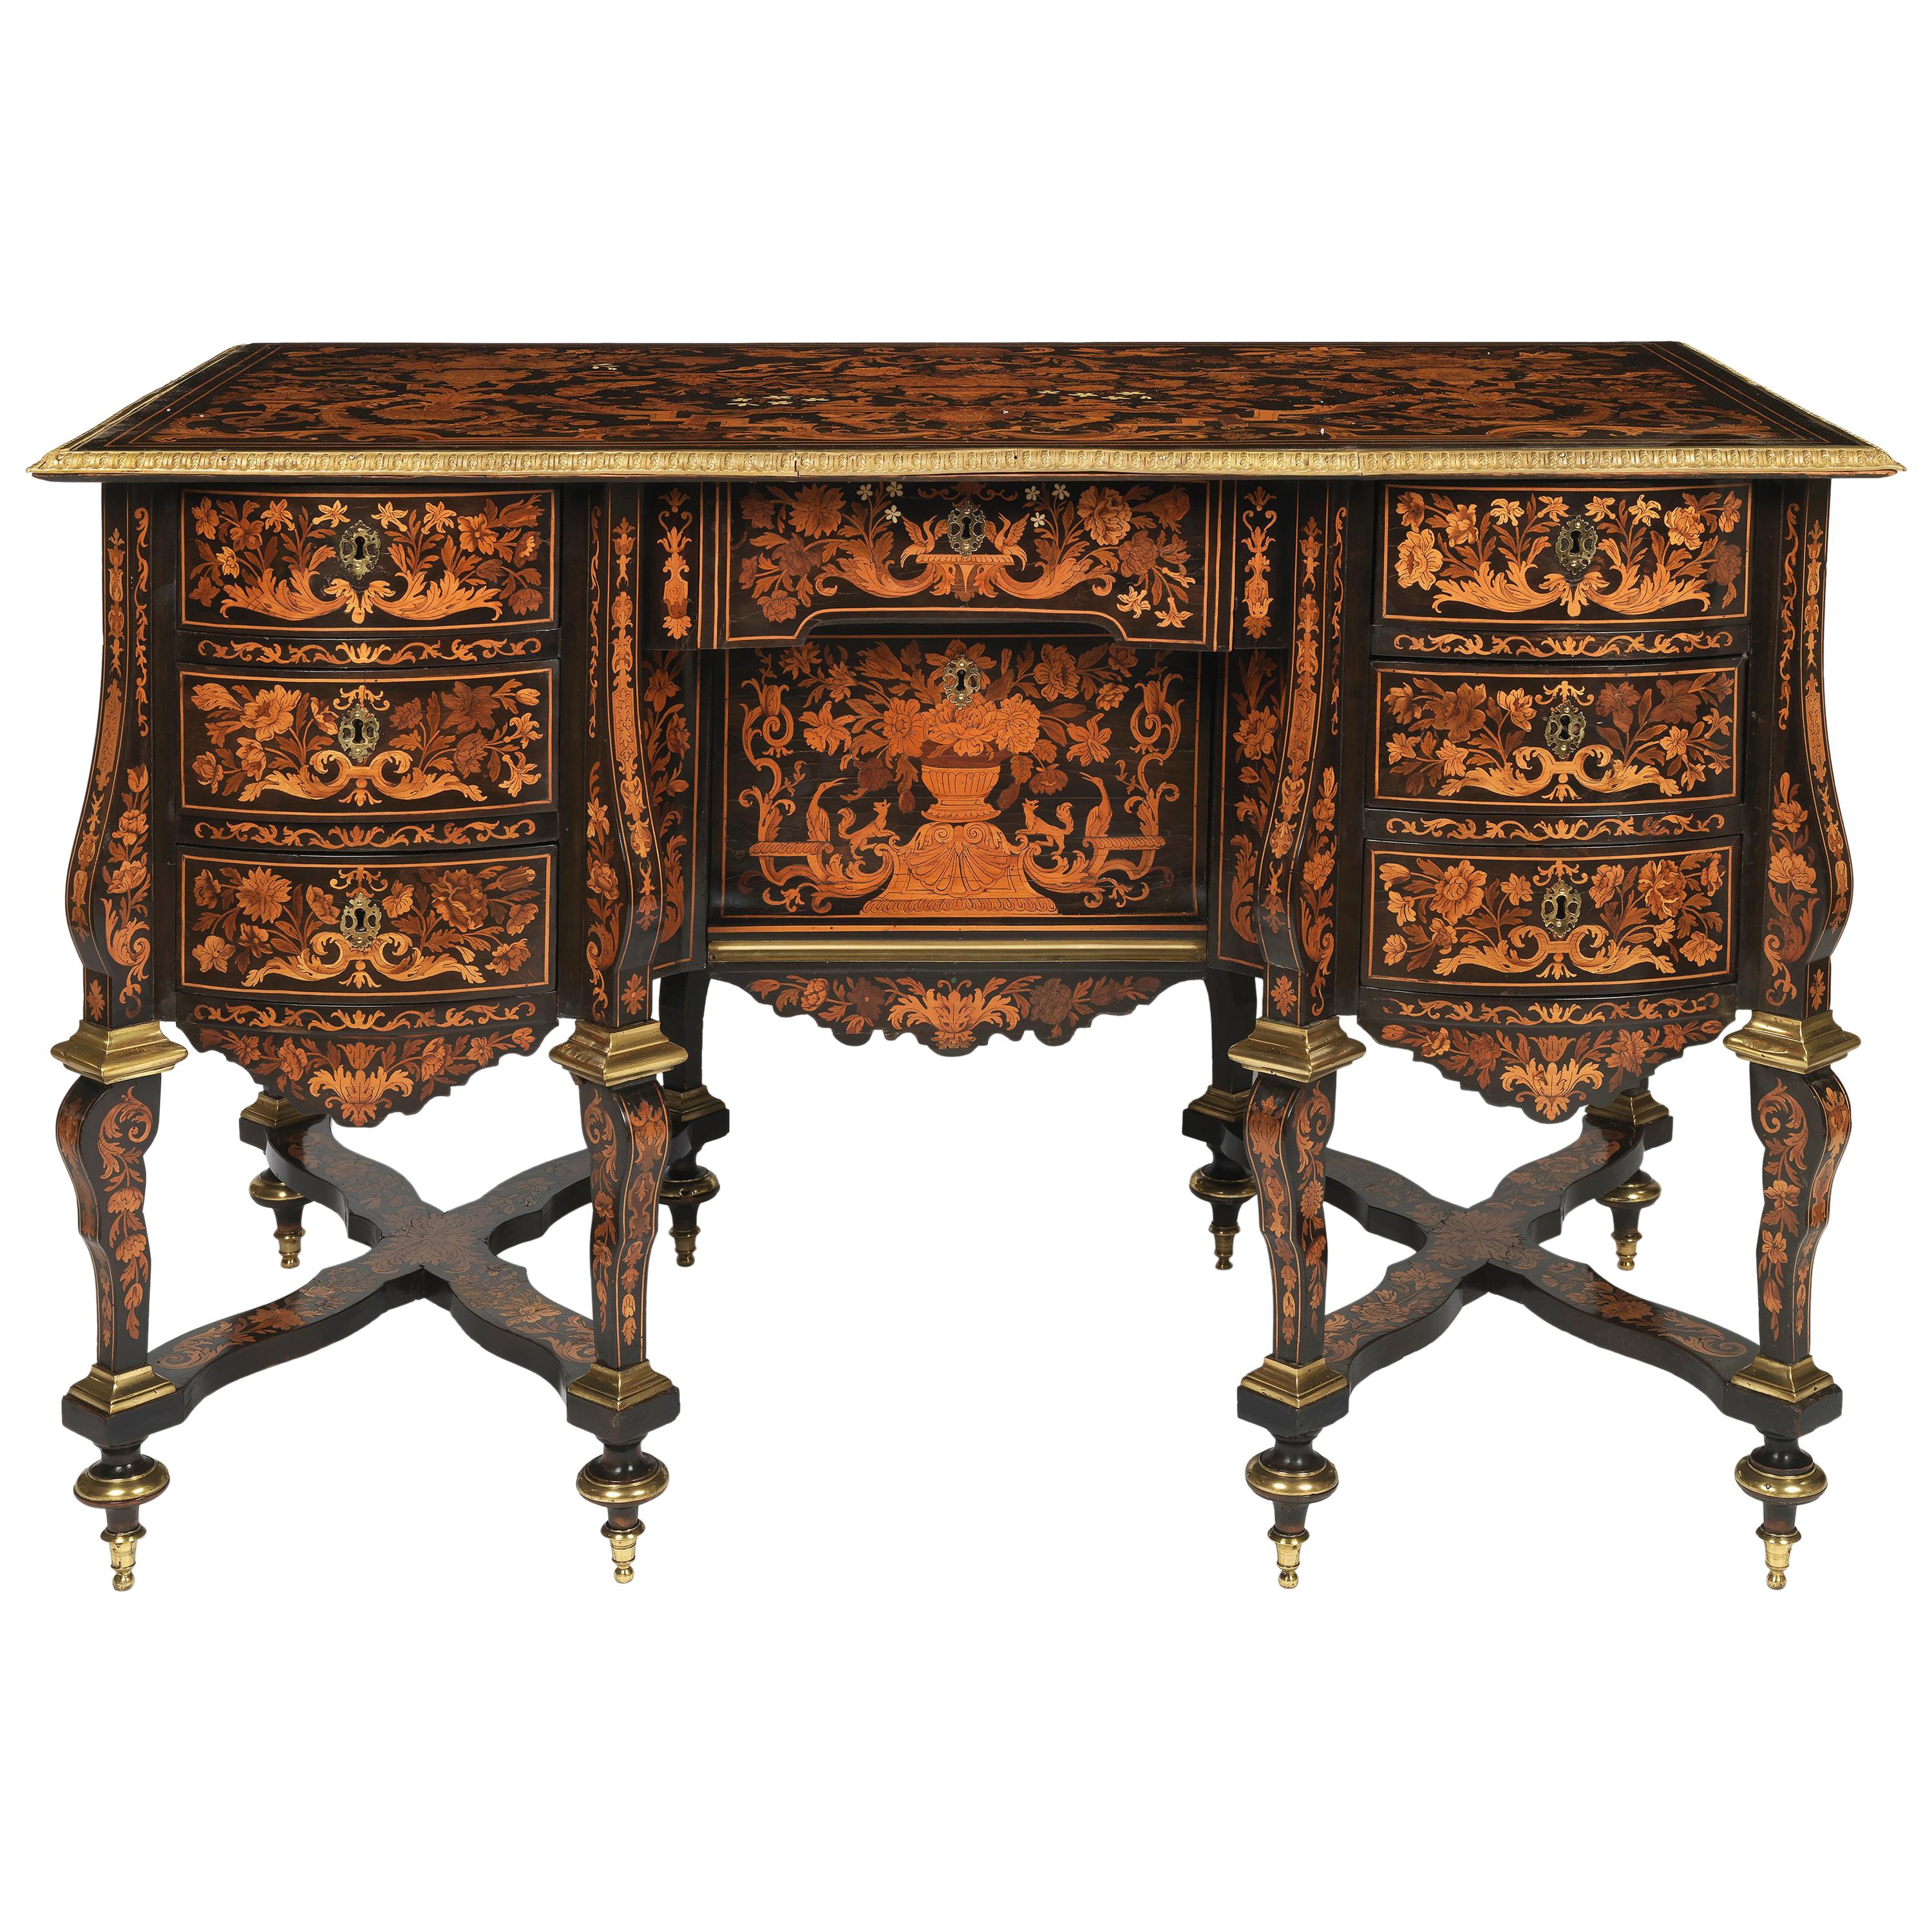 A  Very Rare Marquetry Louis XIV Bureau Mazarin Attributed to Pierre Golle  For Sale